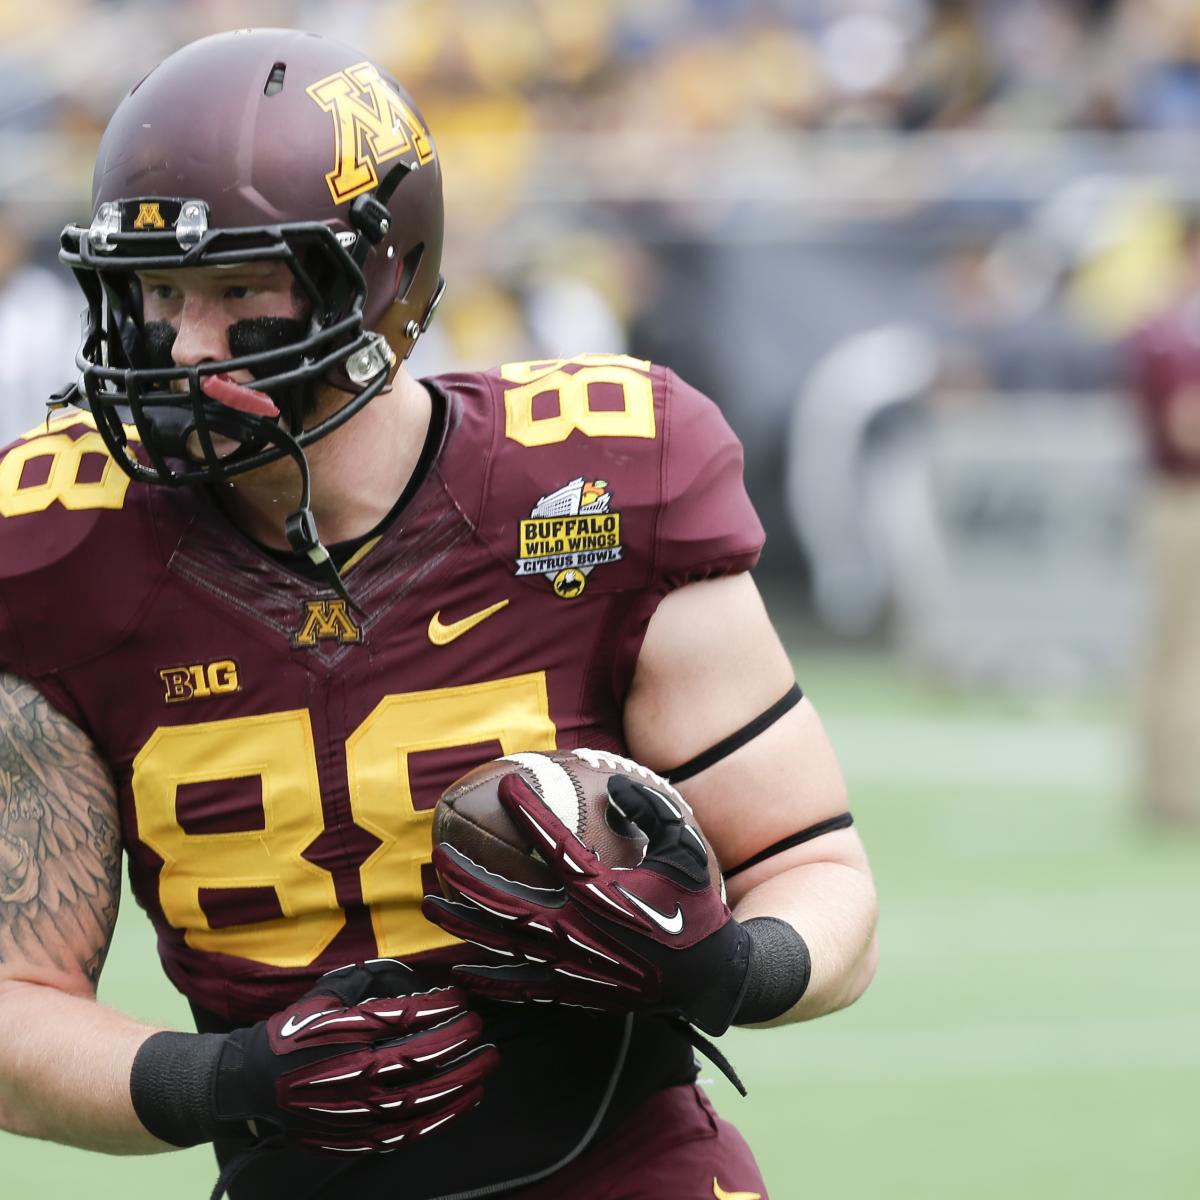 Maxx Williams Is the Only FirstRound Talent in Underwhelming TE Draft